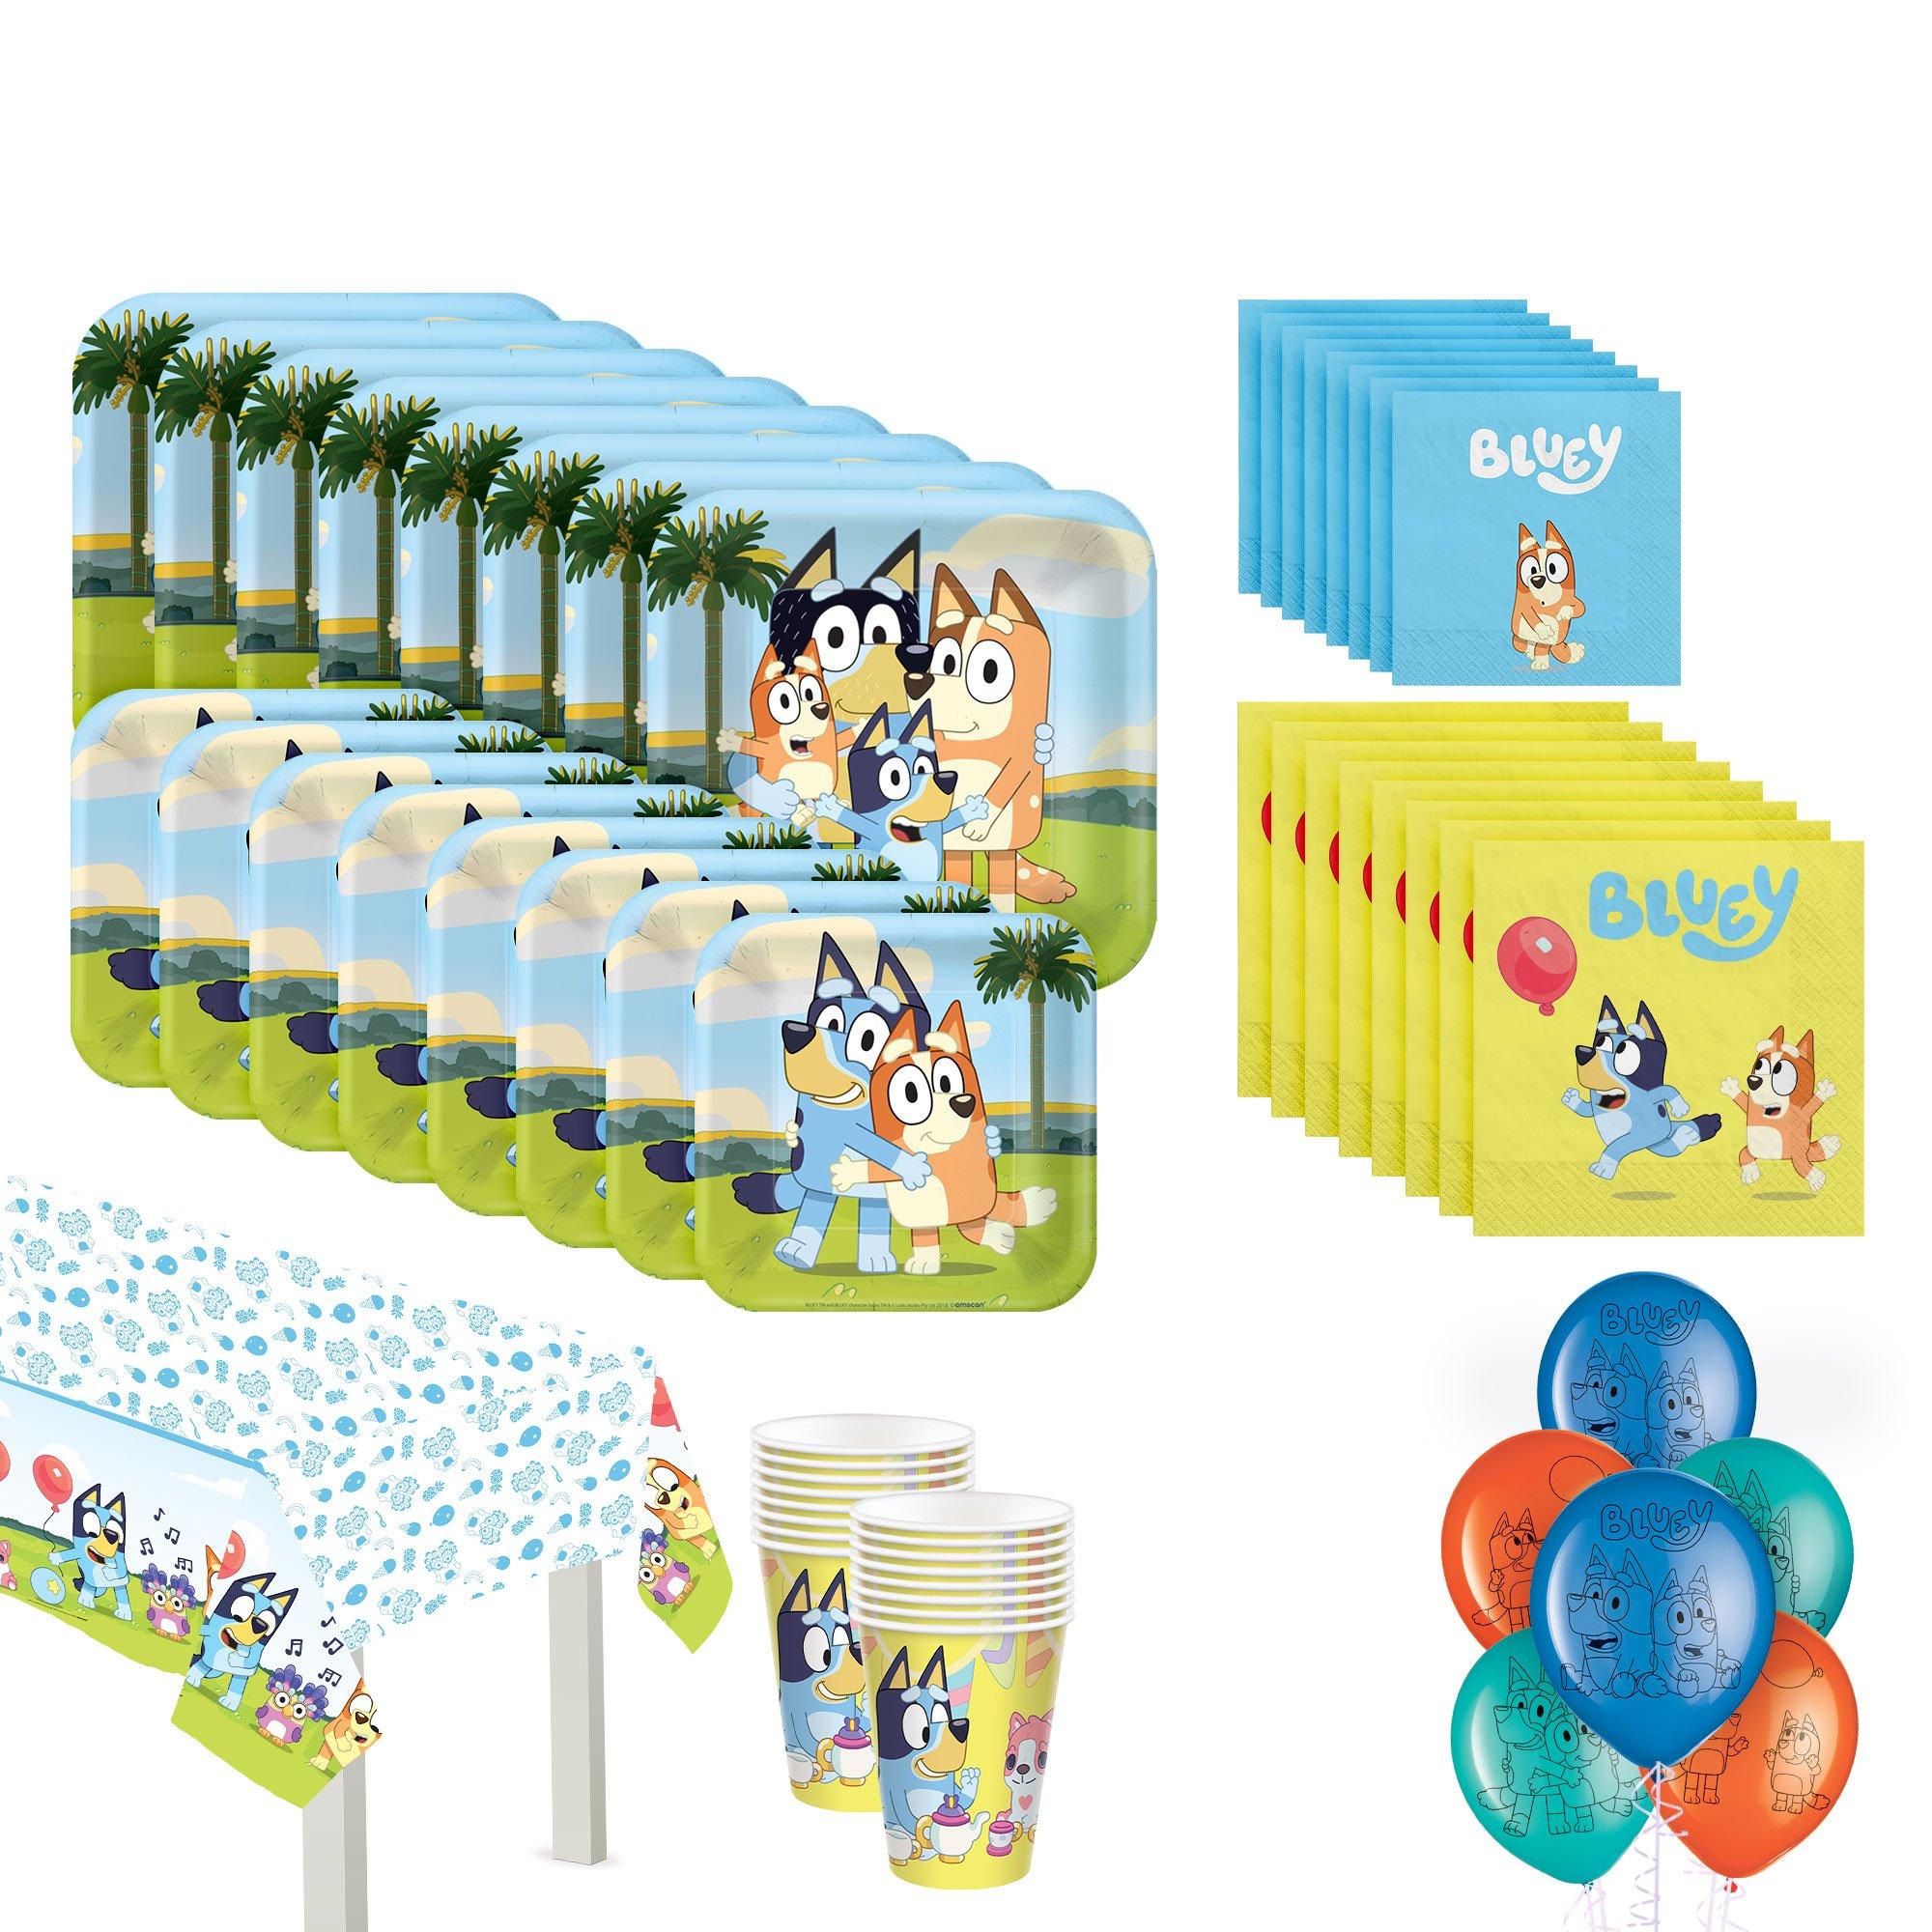 Bluey Birthday Party Supplies for your Bluey Party featuring Bluey Party  Decorations and Bluey Plates and Napkins and Tableware for 16 guests.